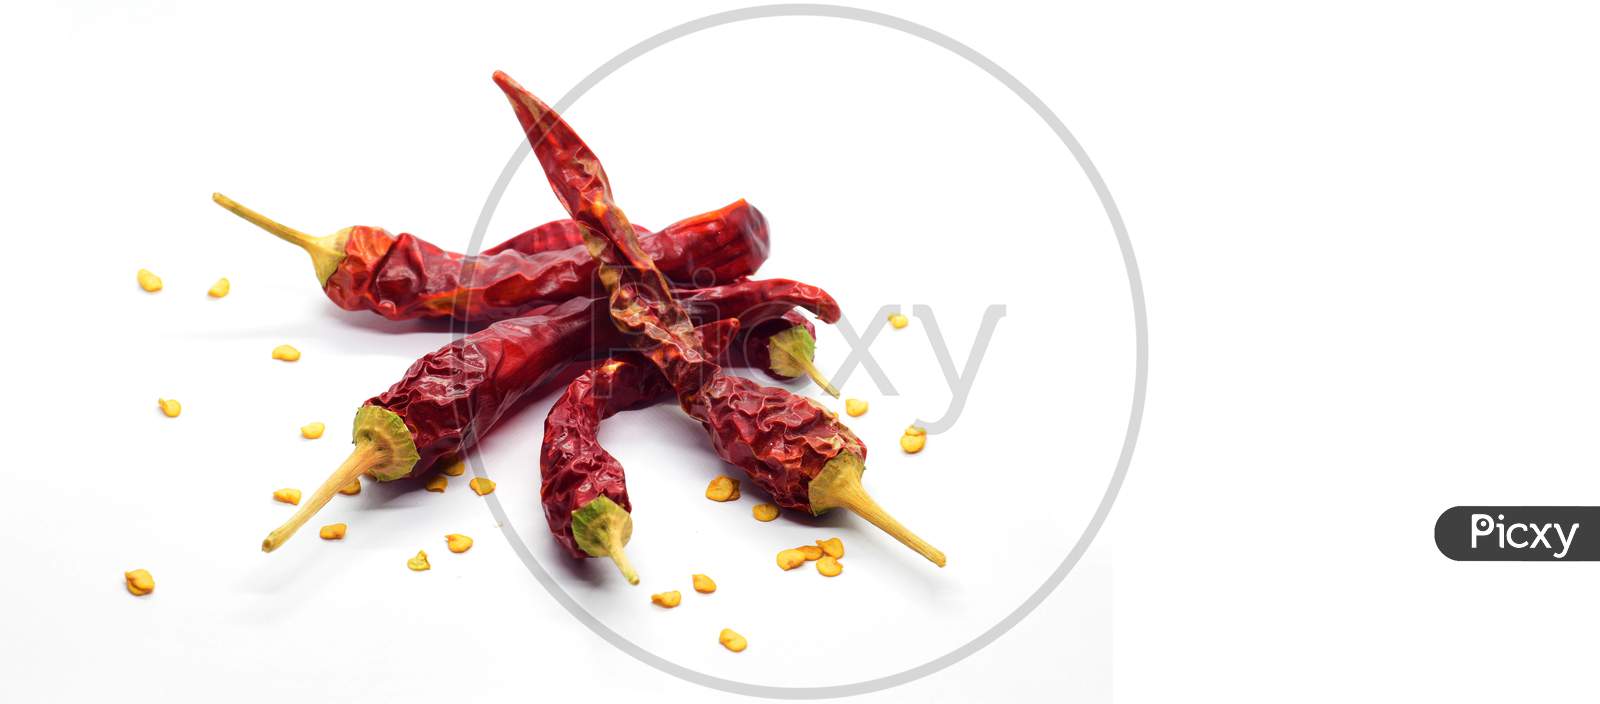 Dried organic red chilies with seeds